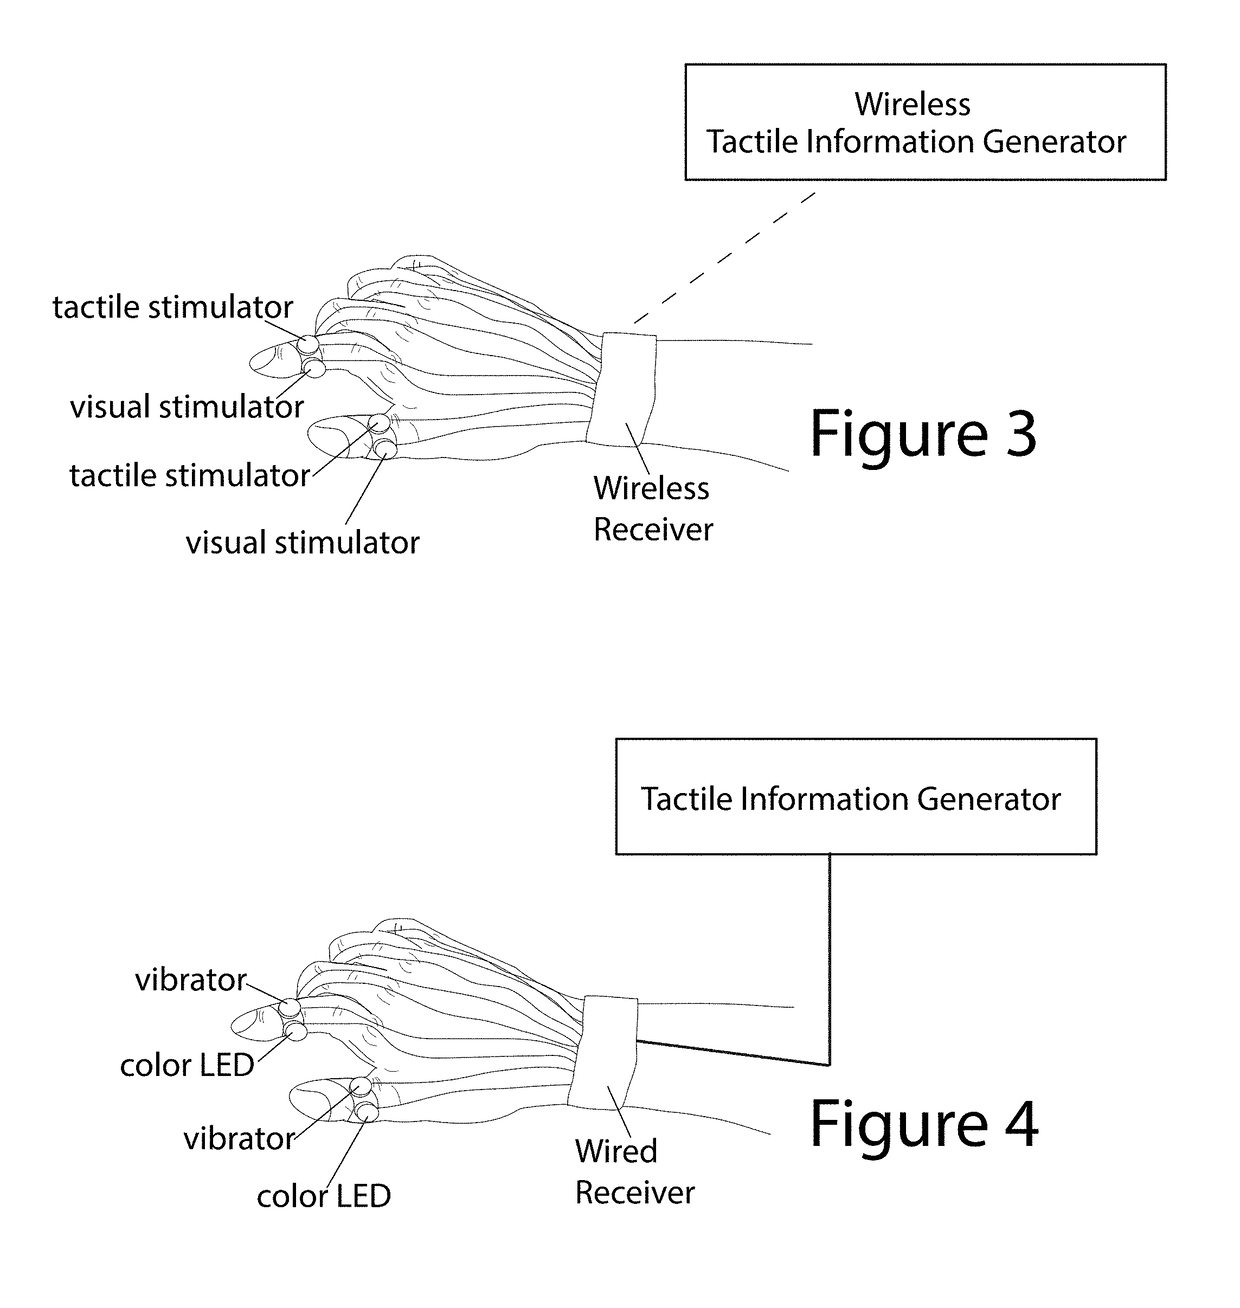 Accelerated Learning, Entertainment and Cognitive Therapy Using Augmented Reality Comprising Combined Haptic, Auditory, and Visual Stimulation